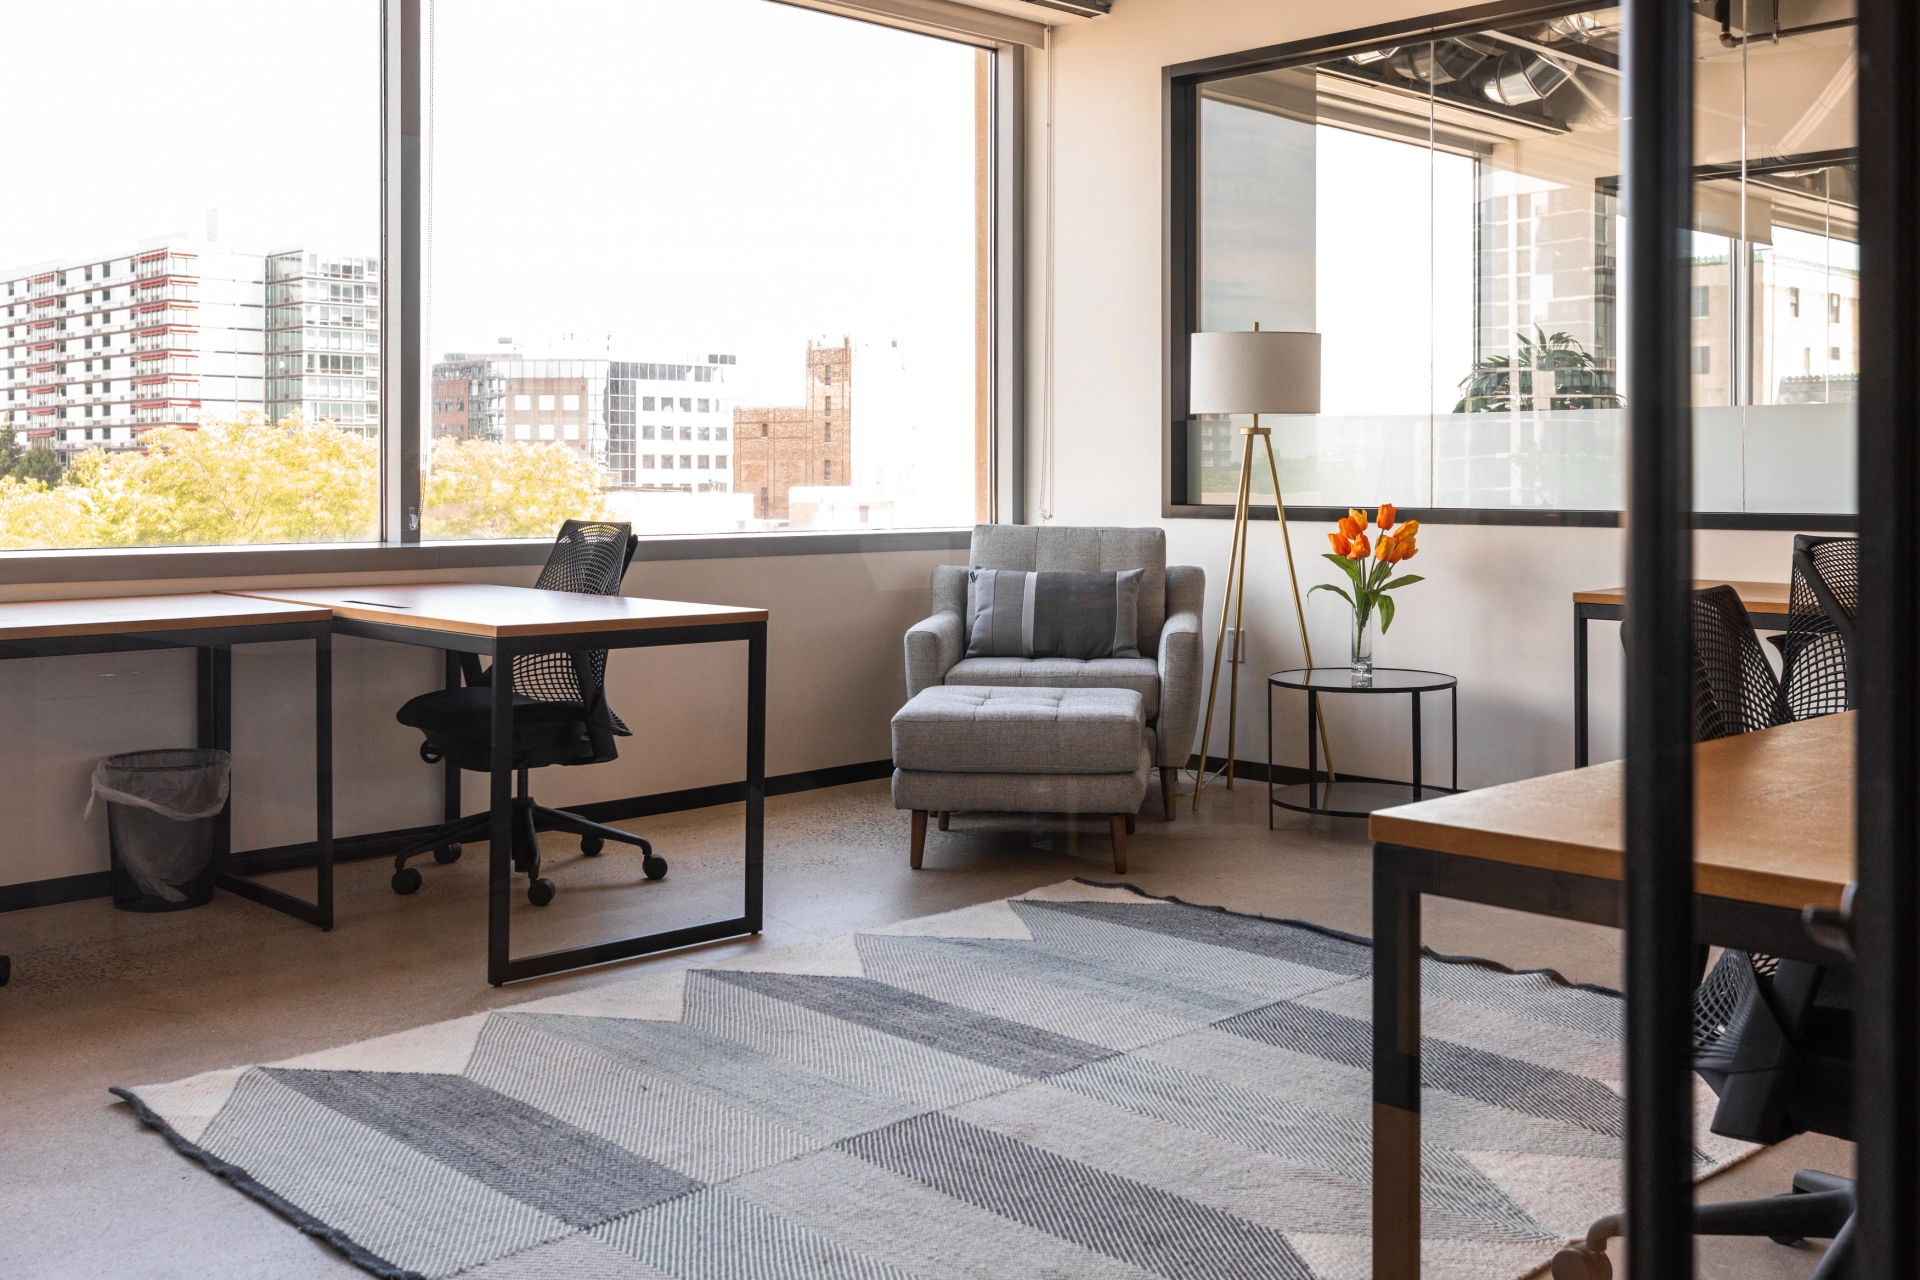 A coworking office with two desks and a window.